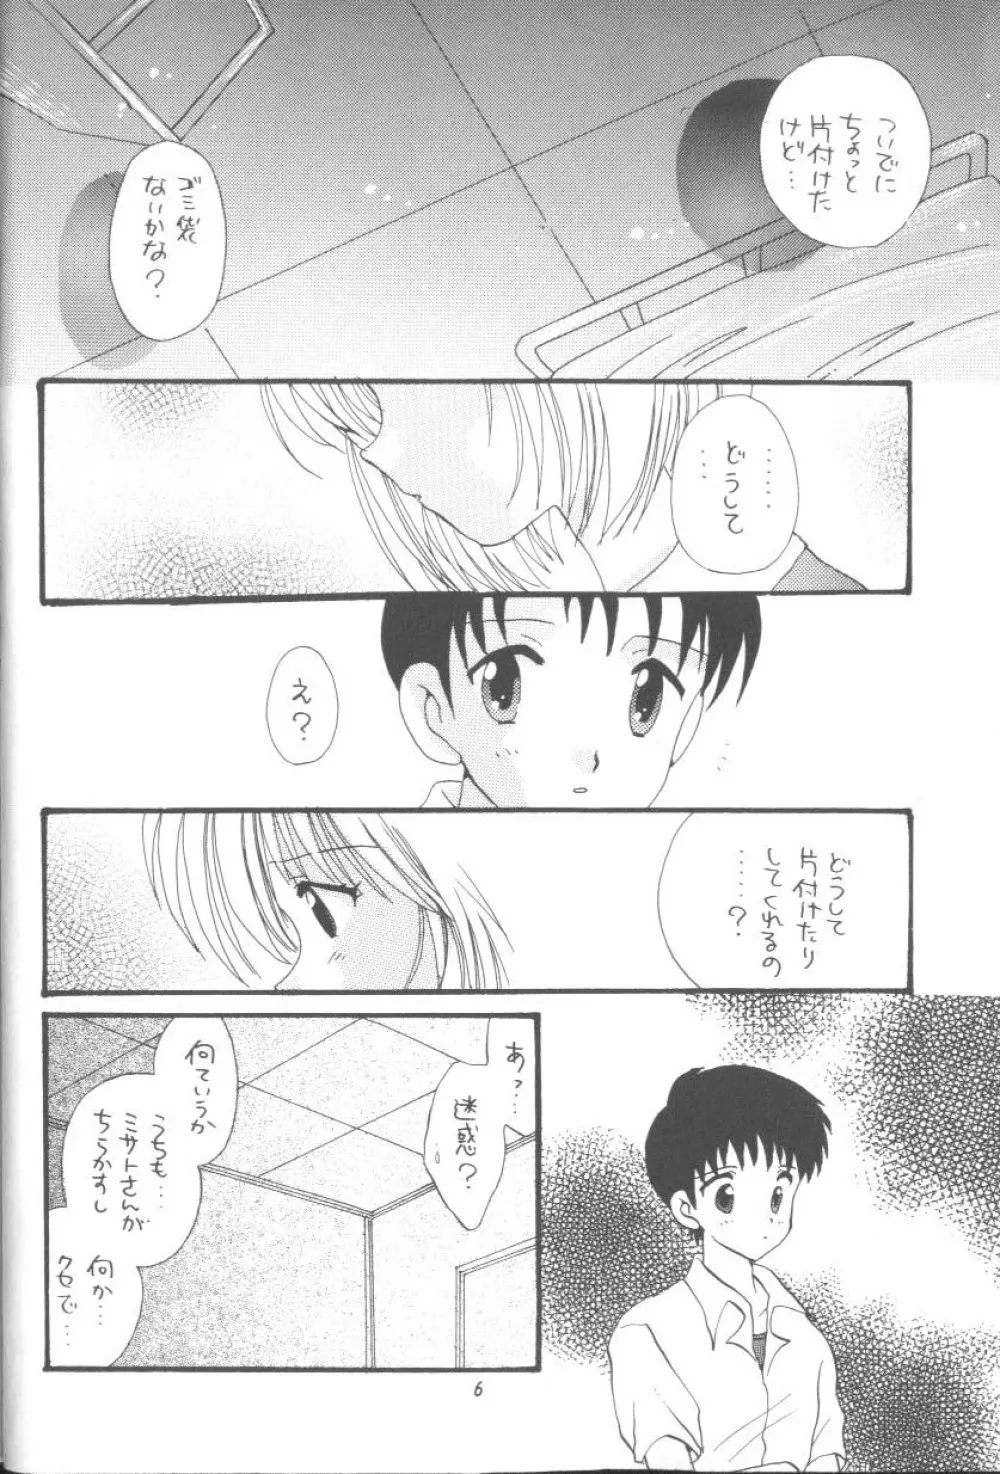 From The Neon Genesis 02 6ページ